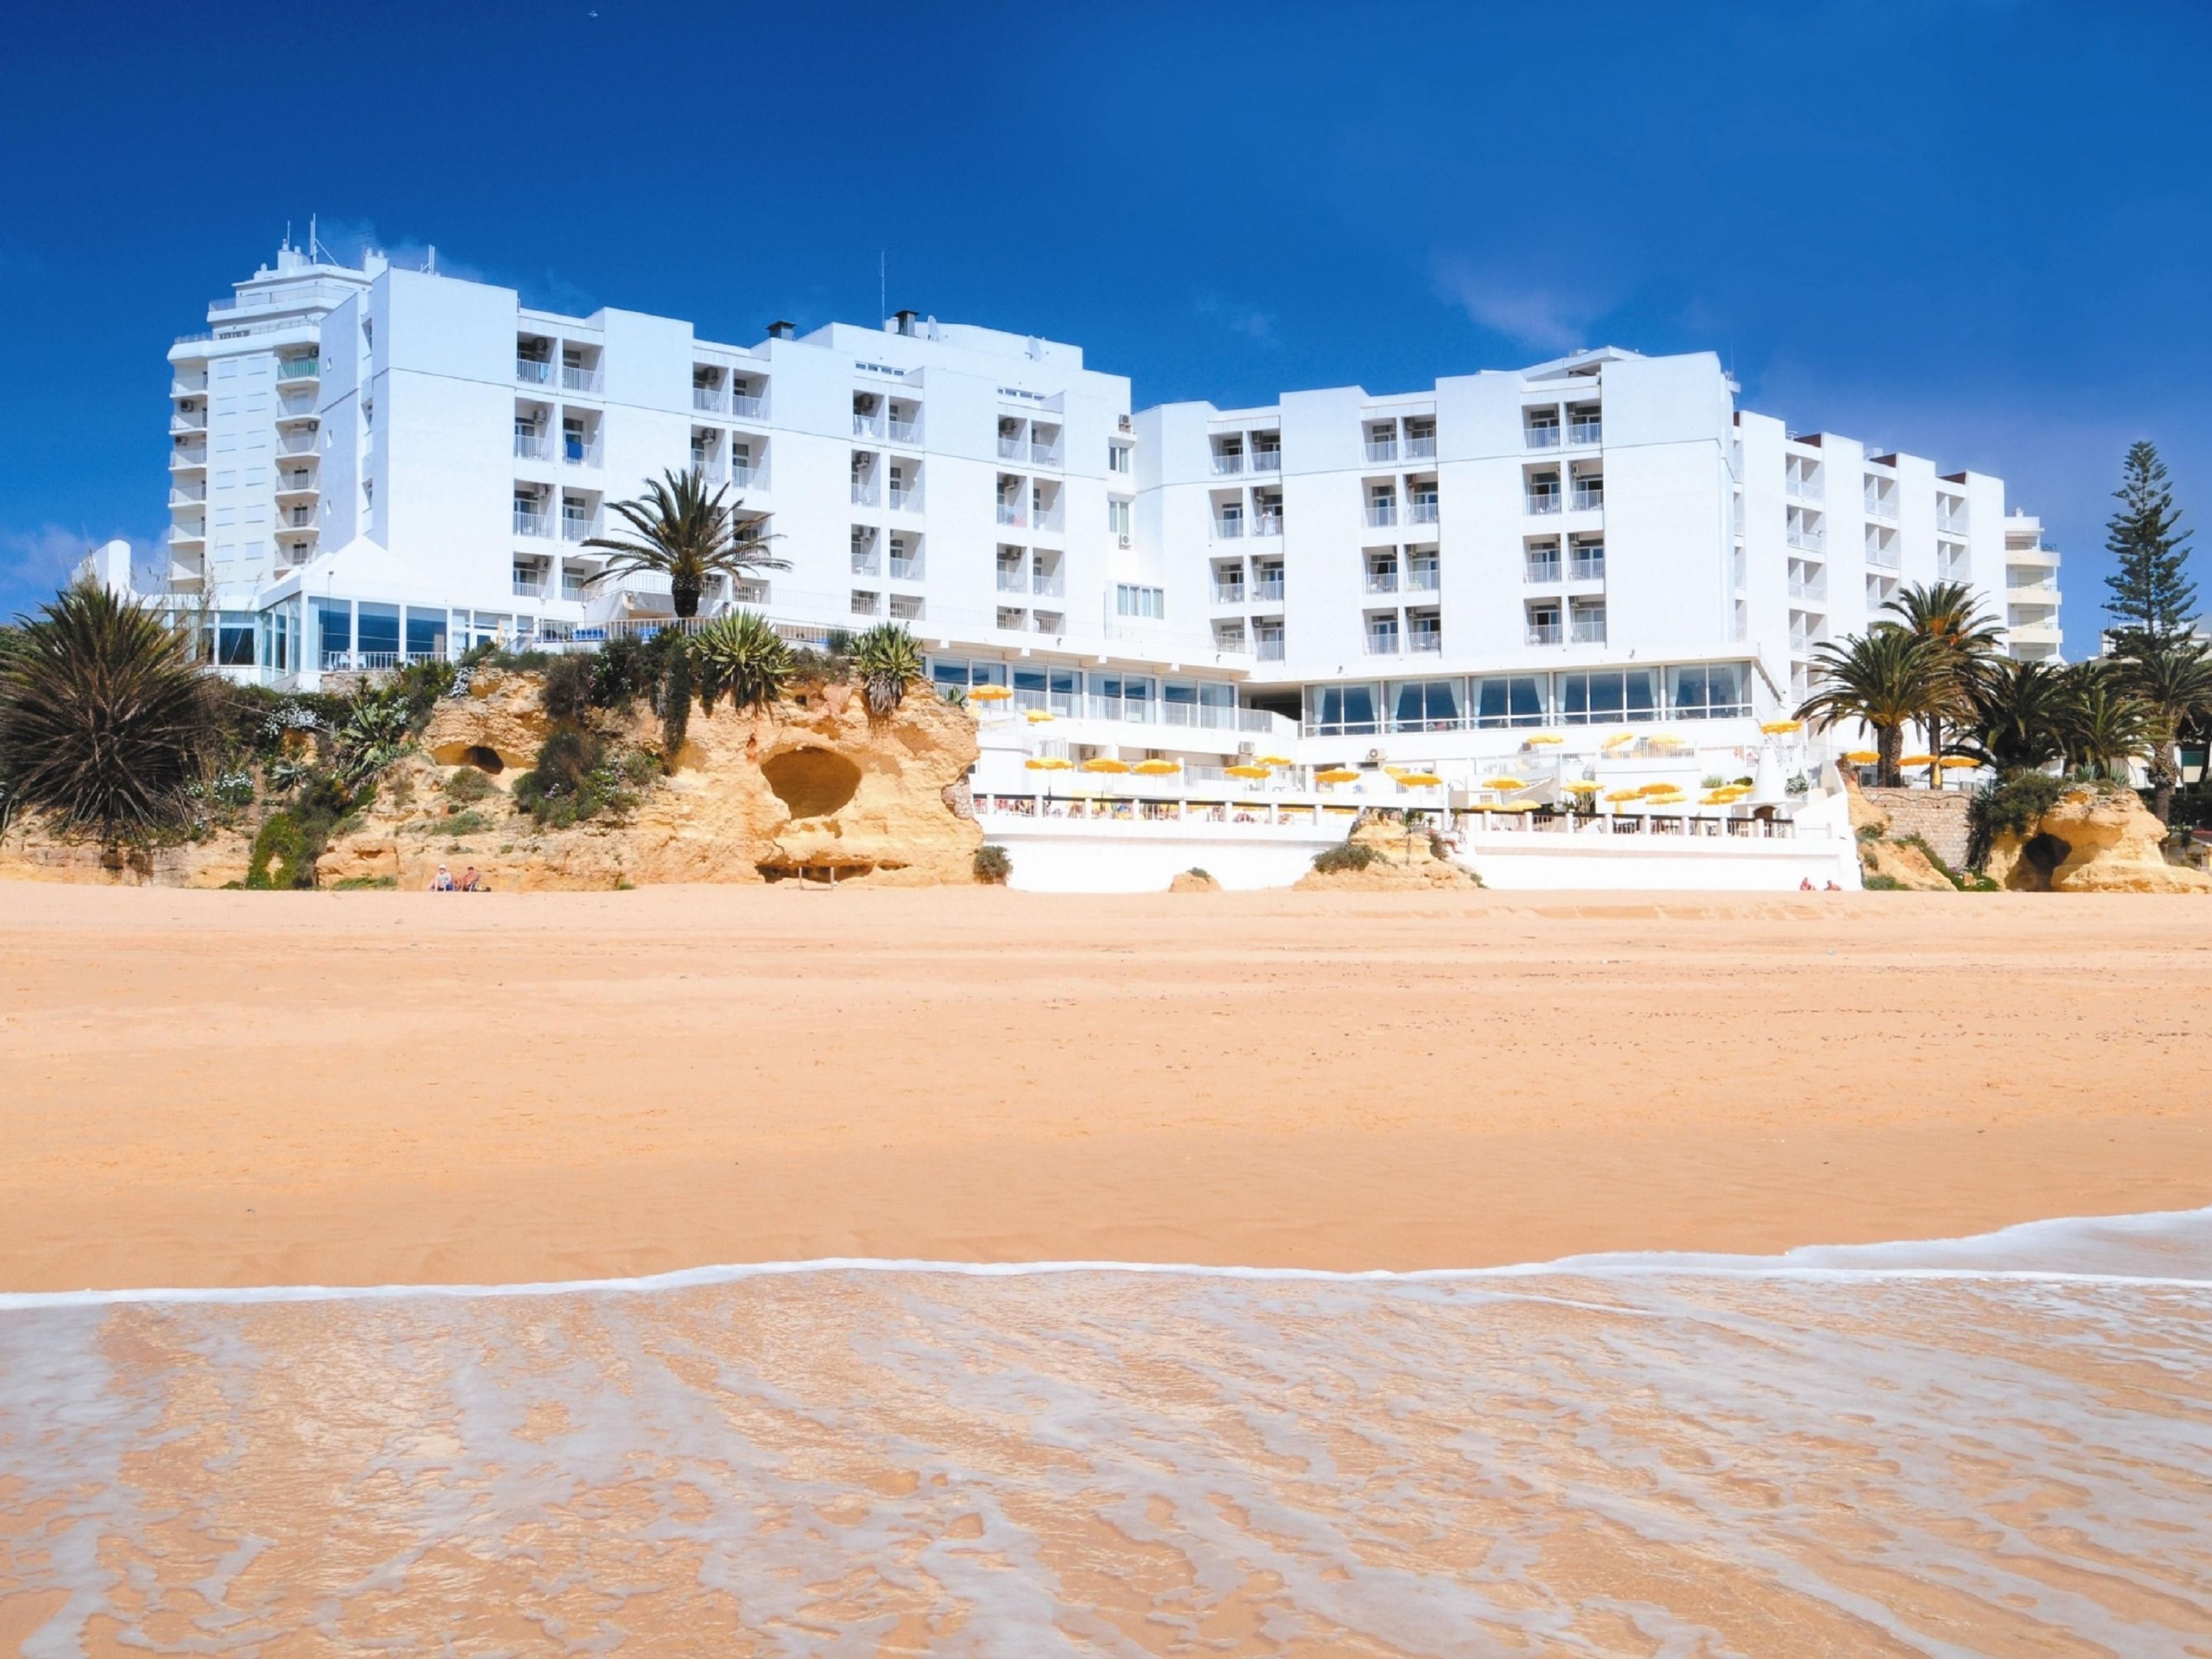 Perpetual sunshine and beautiful beaches will ensure you'll simply love Portugal